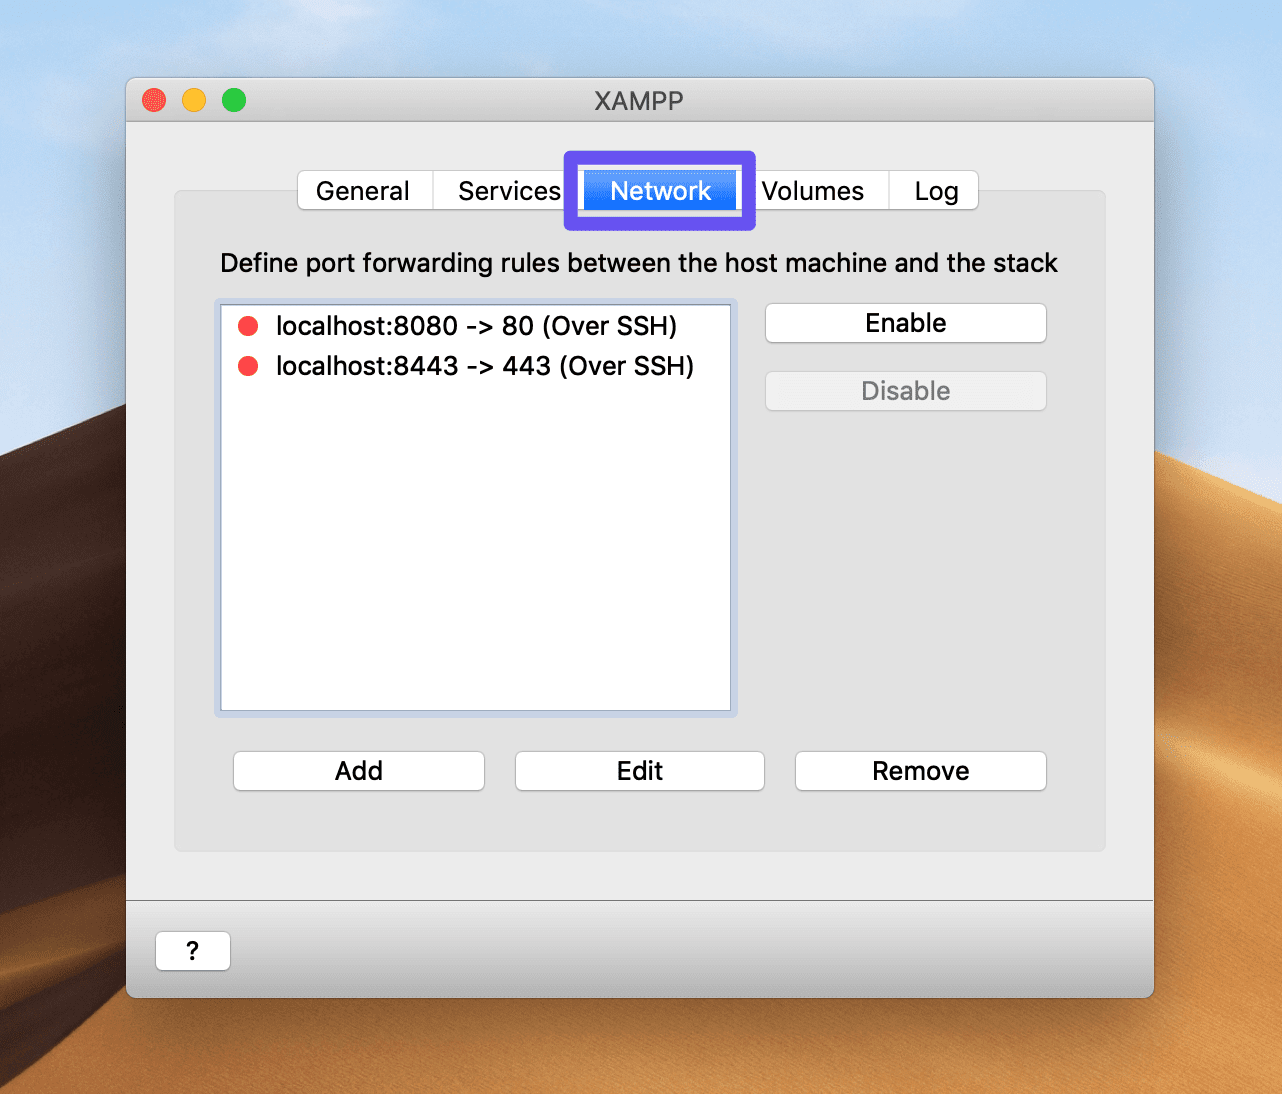 Access the XAMPP Network options on macOS.